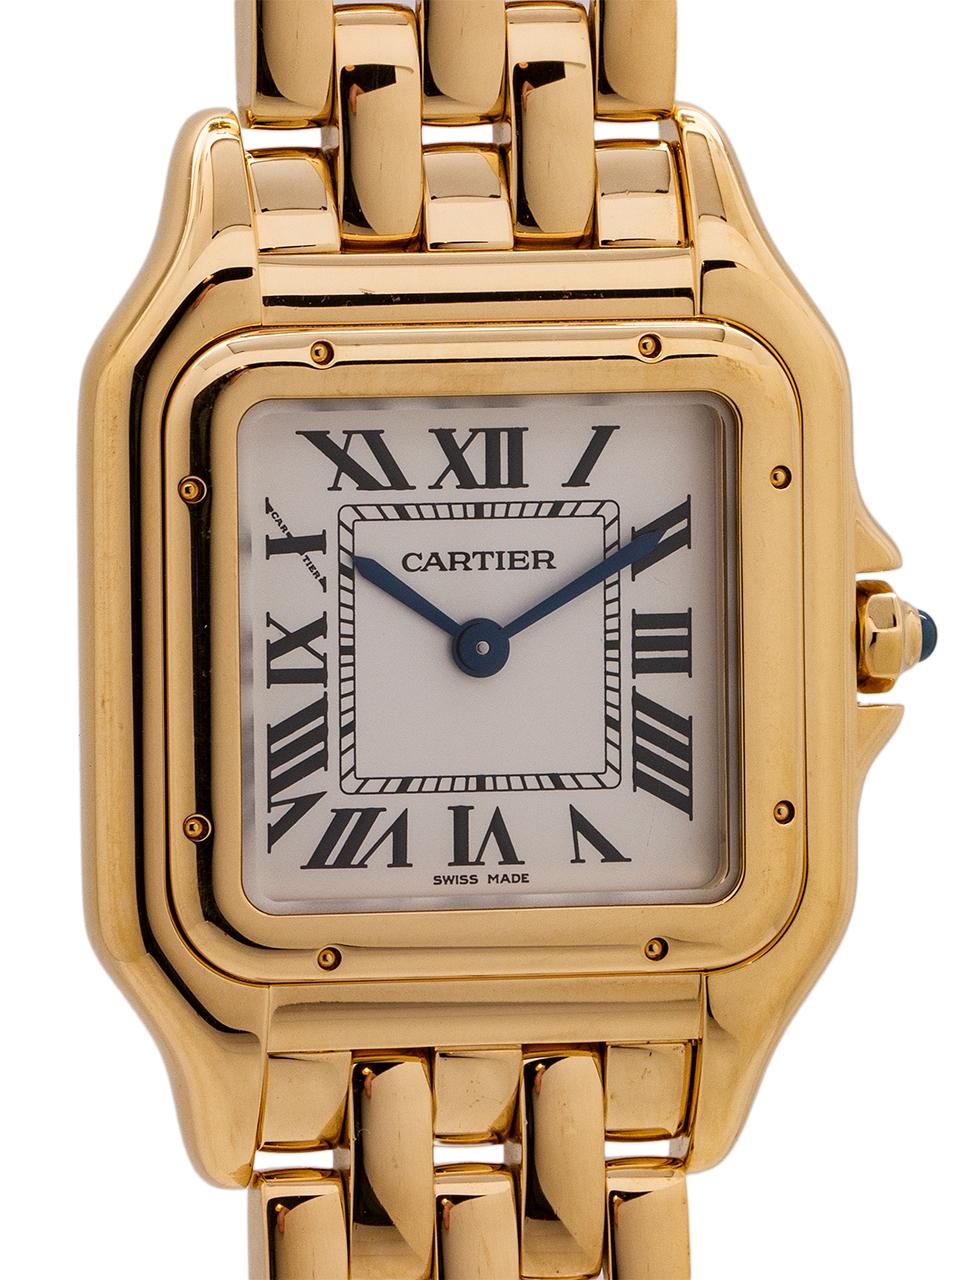 
Cartier Lady’s 18K yellow gold Panther circa 2017. Very nice condition preowned example of the recently re-released classic Cartier piece. Battery powered quartz movement. Panther 18K YG bracelet with butterfly deployment clasp. The Panther was a